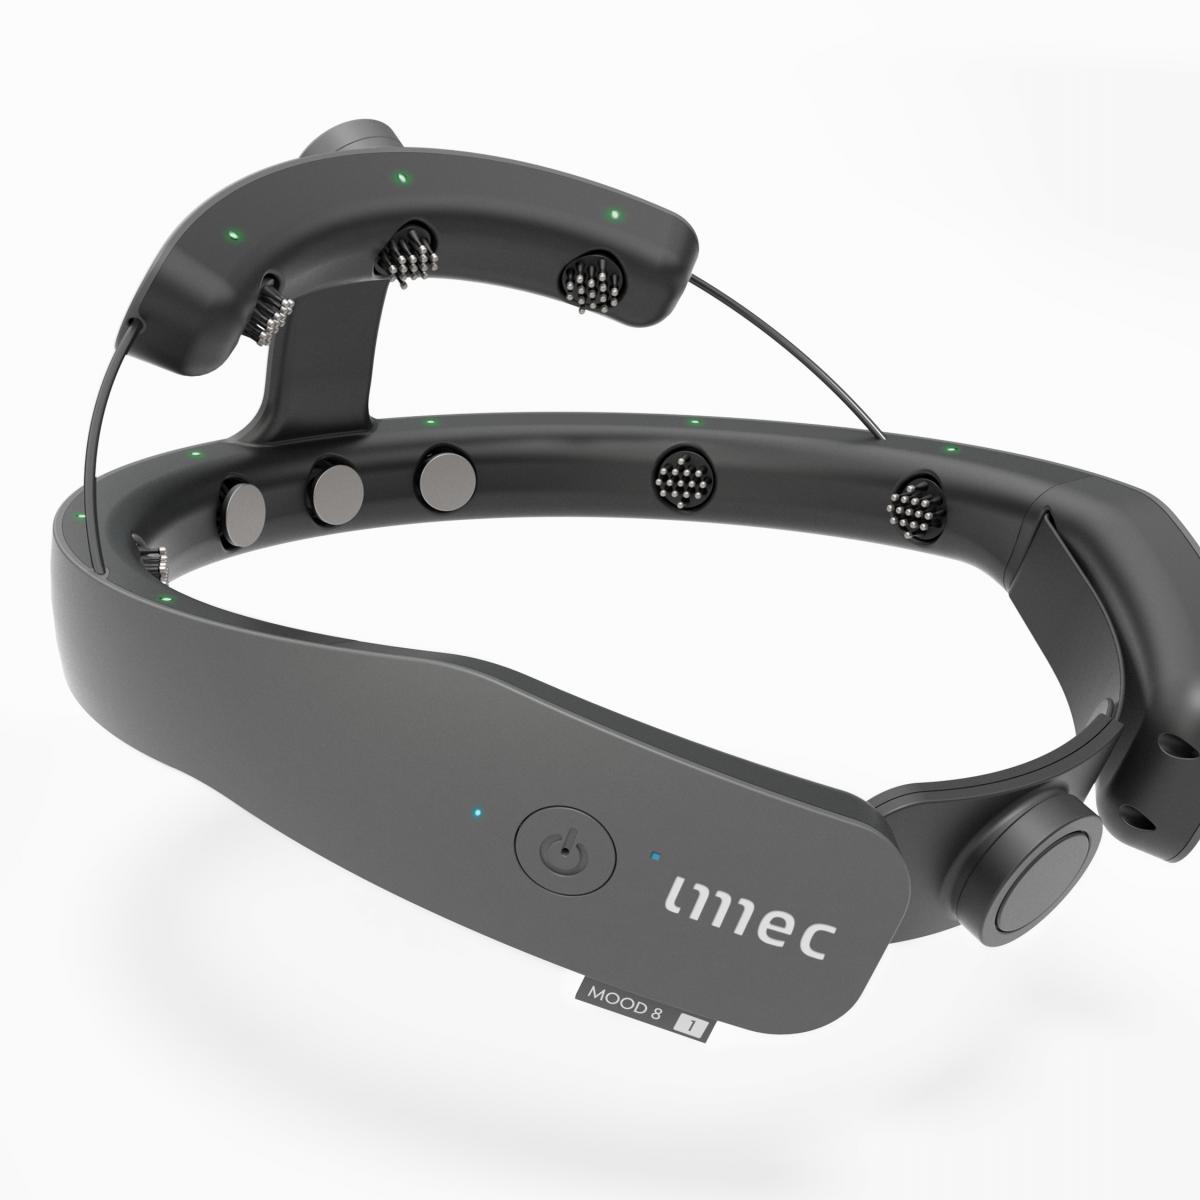 Two of imec’s EEG headsets: the one from the press release in 2018 and the one developed for Amorepacific to be used as an investigational device for fragrance studies.